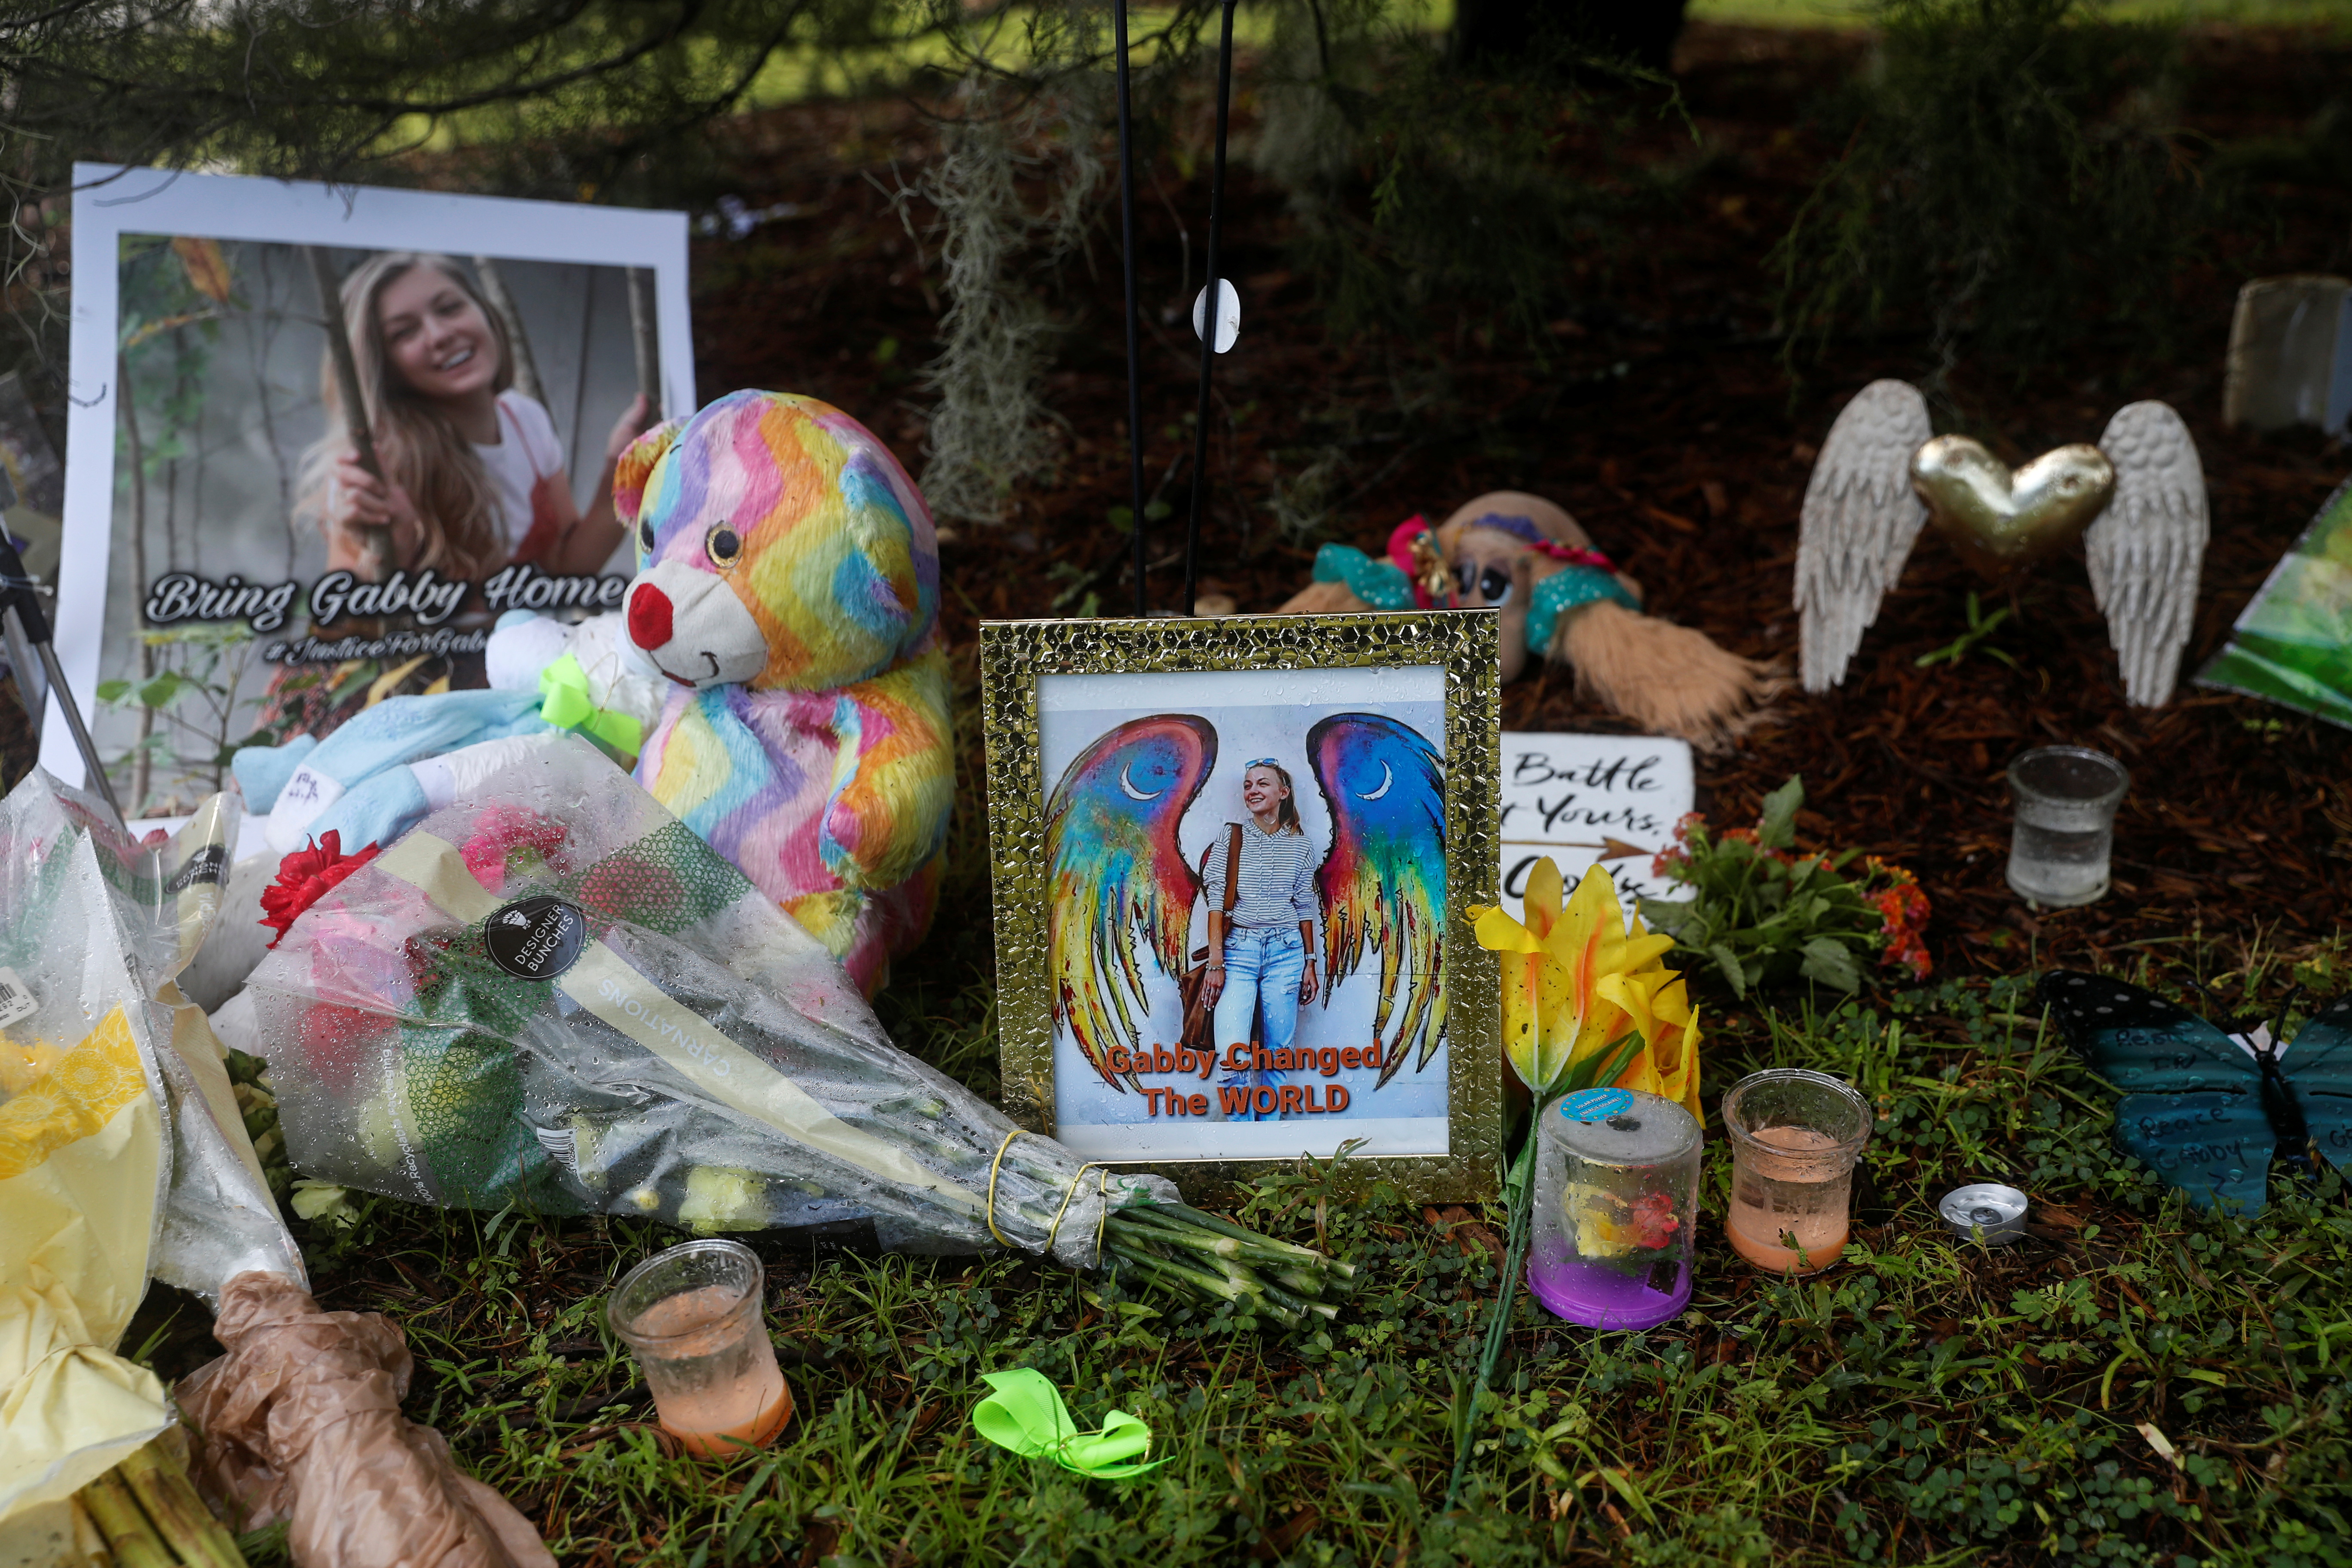 A makeshift memorial for Gabby Petito is seen near City Hall in North Port, Florida